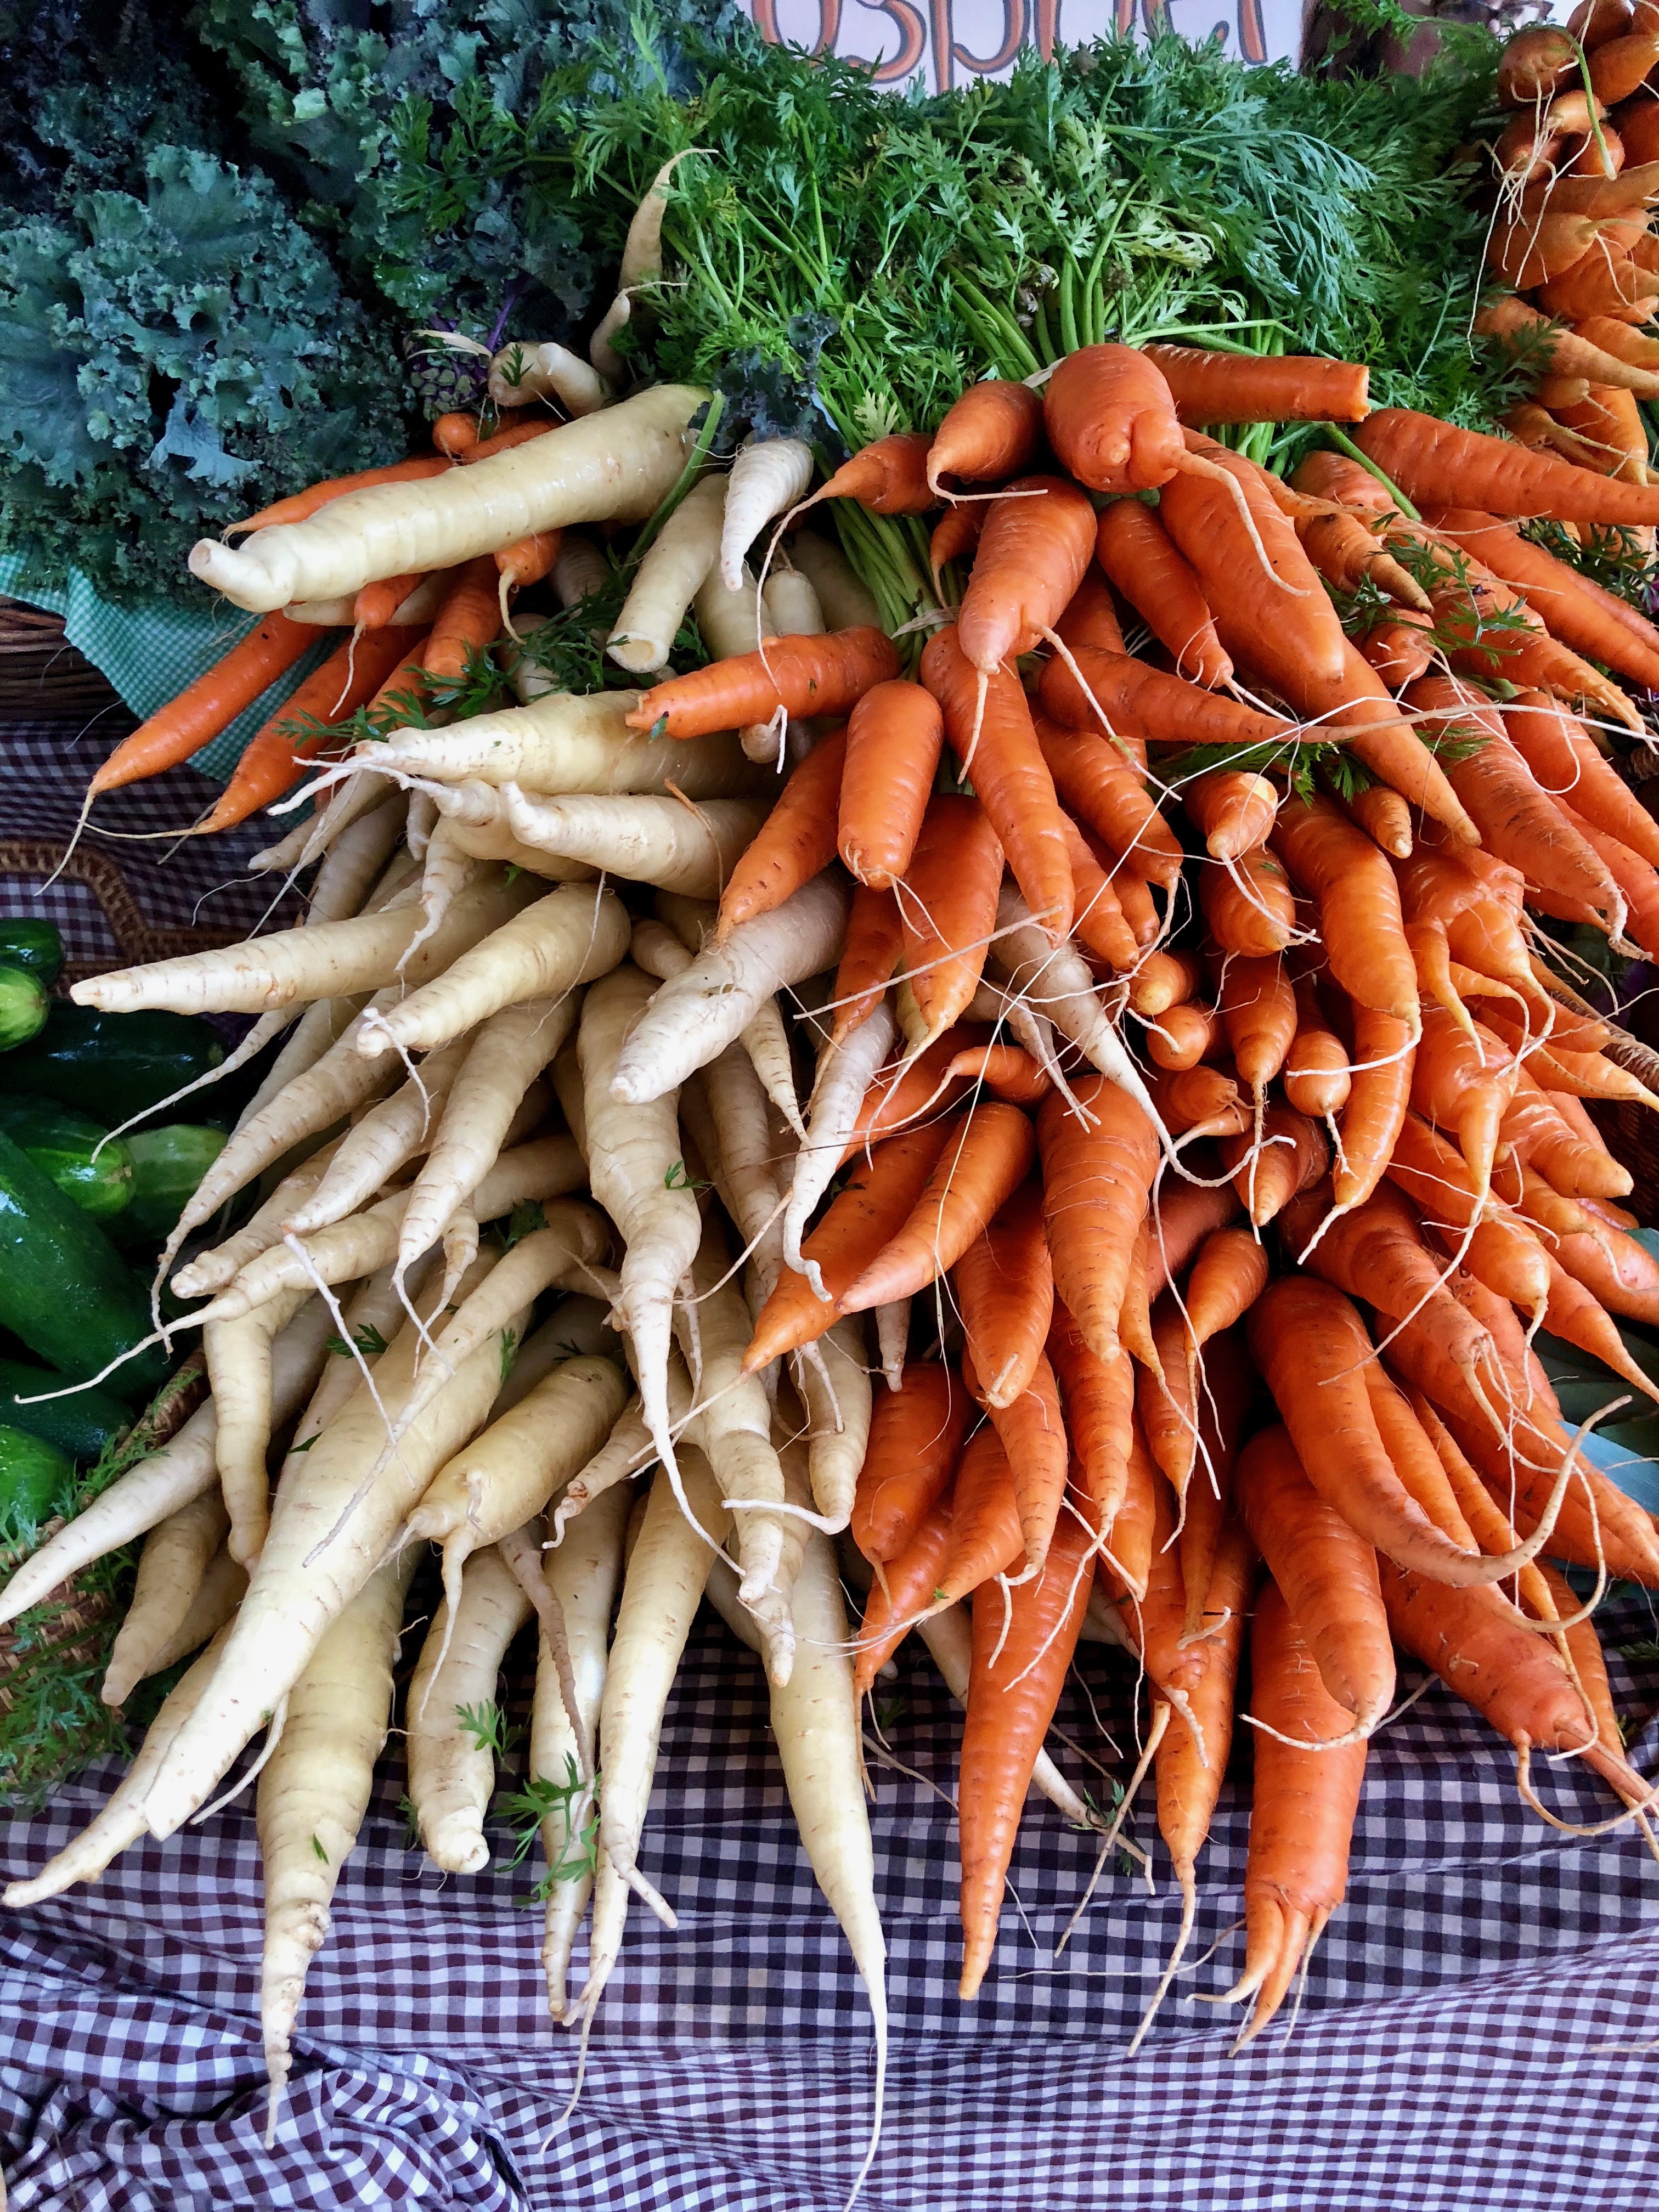 Fresh orange carrots and white carrots with green tops.